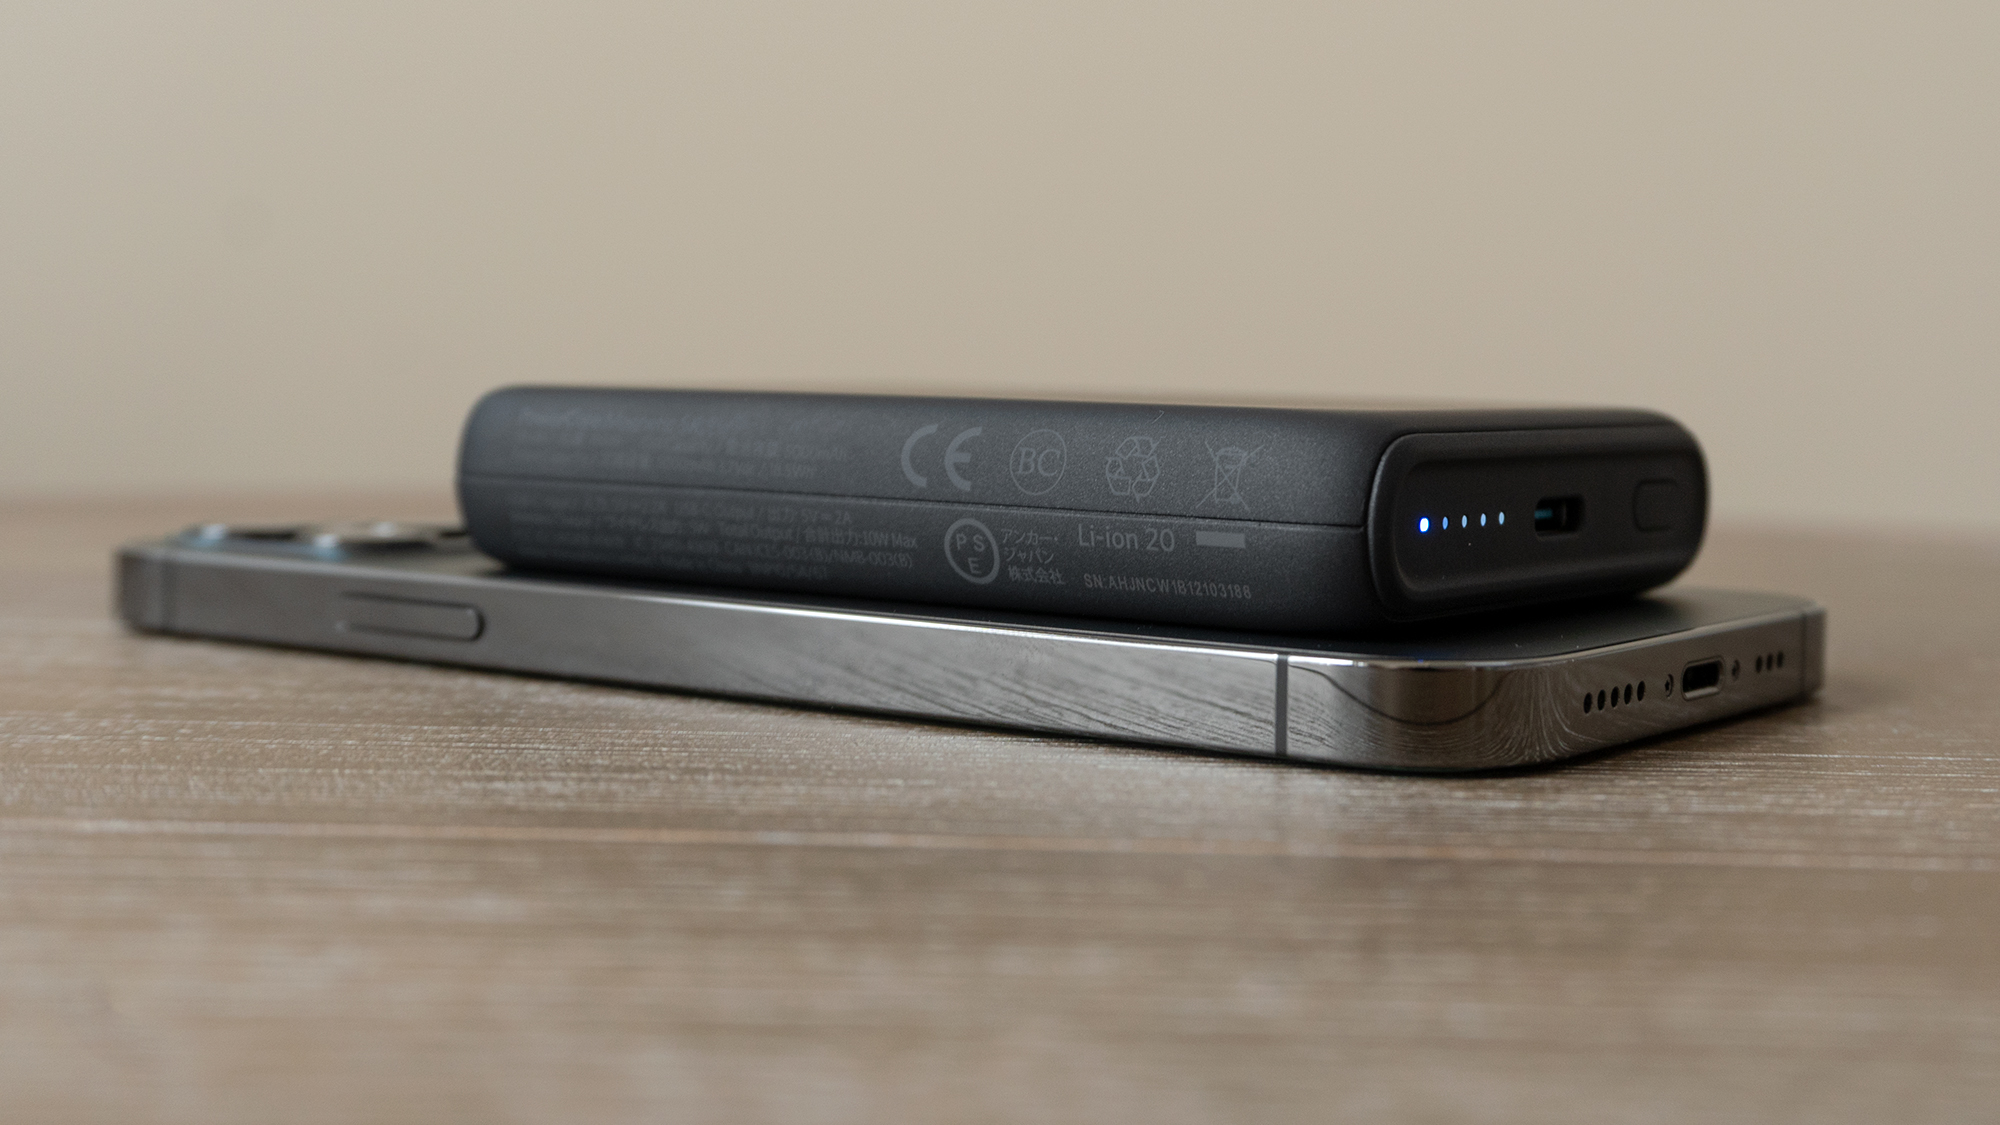 There's no getting around it: Anker's MagSafe-compatible portable wireless charger will add some bulk to your iPhone 12. (Photo: Andrew Liszewski/Gizmodo)